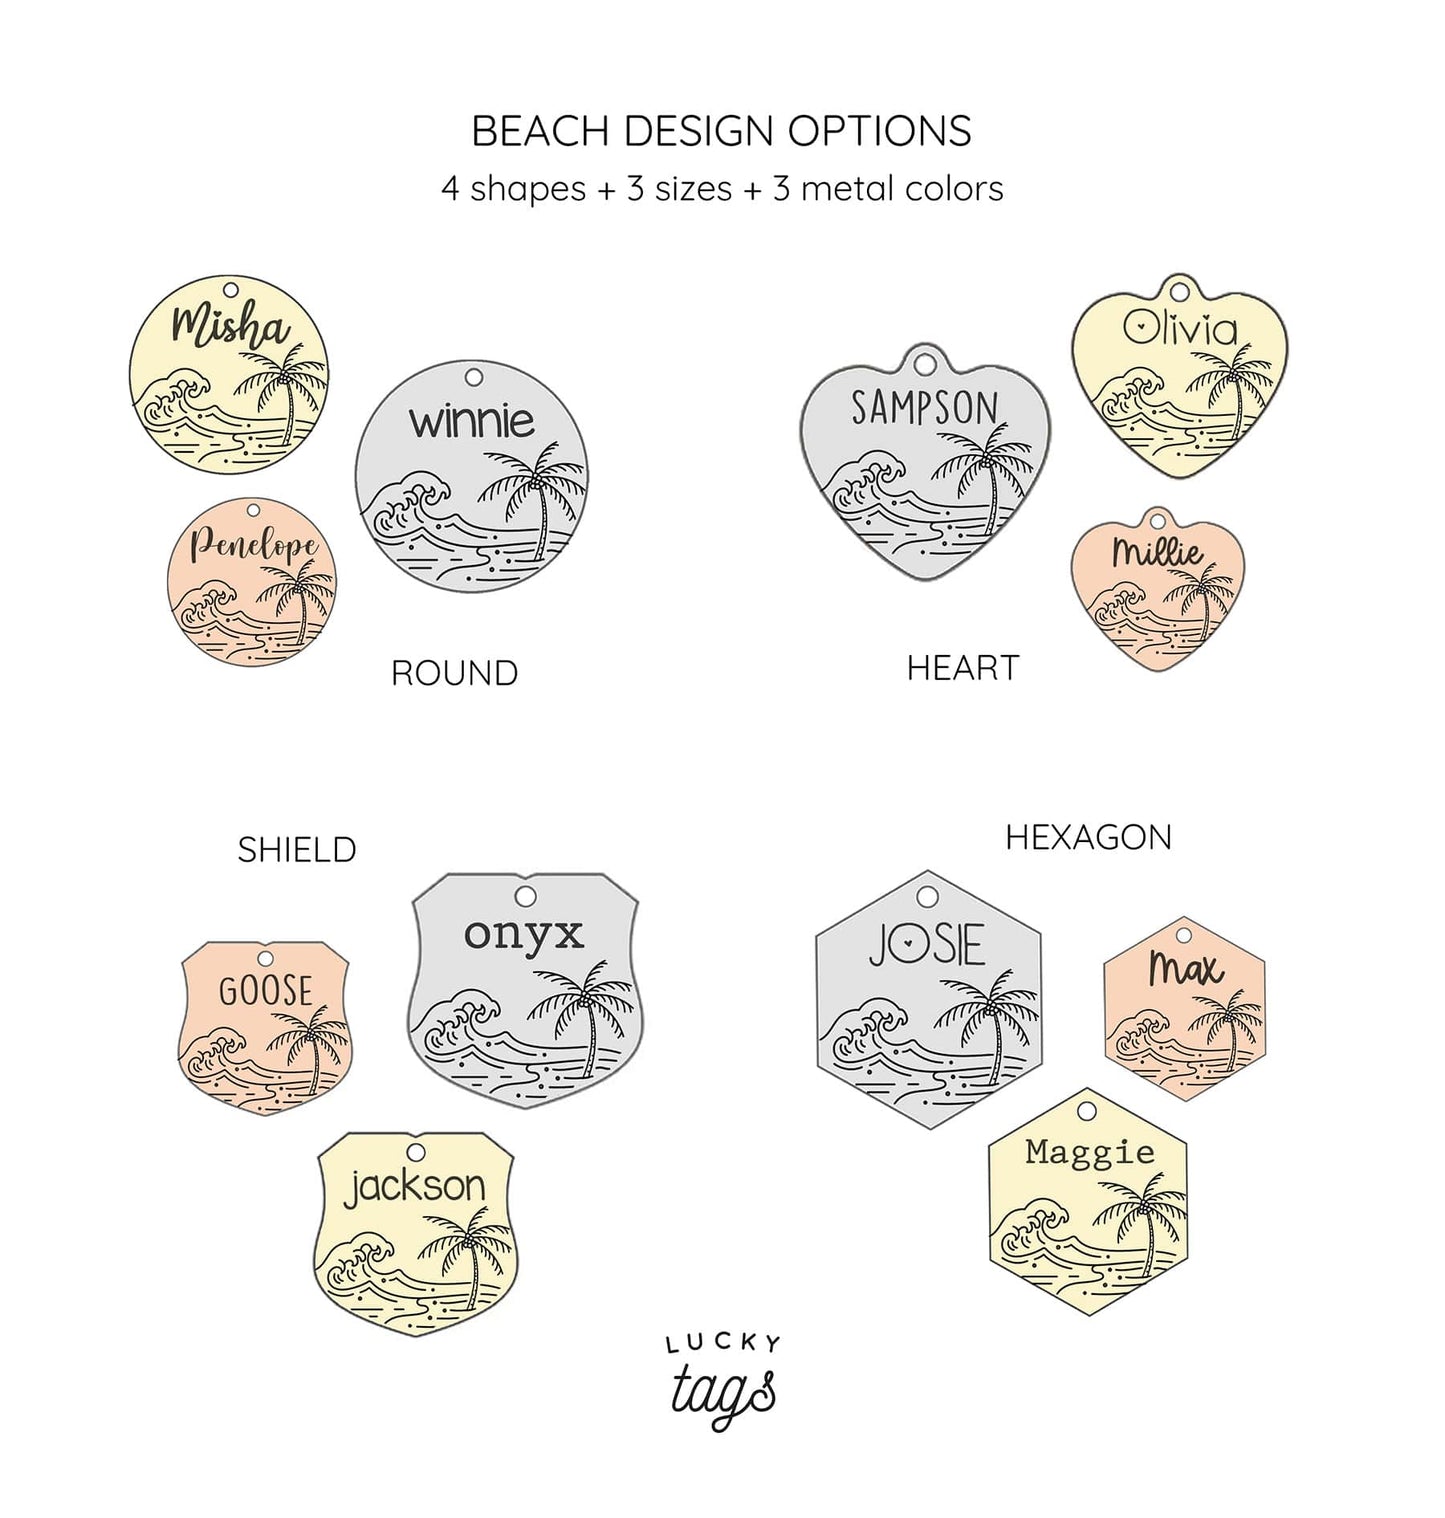 Lucky Tags, beach design, round tags, heart tags, shield tags, hexagon tags,  custom dog tags, engraved tags, beach tags, personalized tags, pet tags, collar tags, all tags, order dogs tags